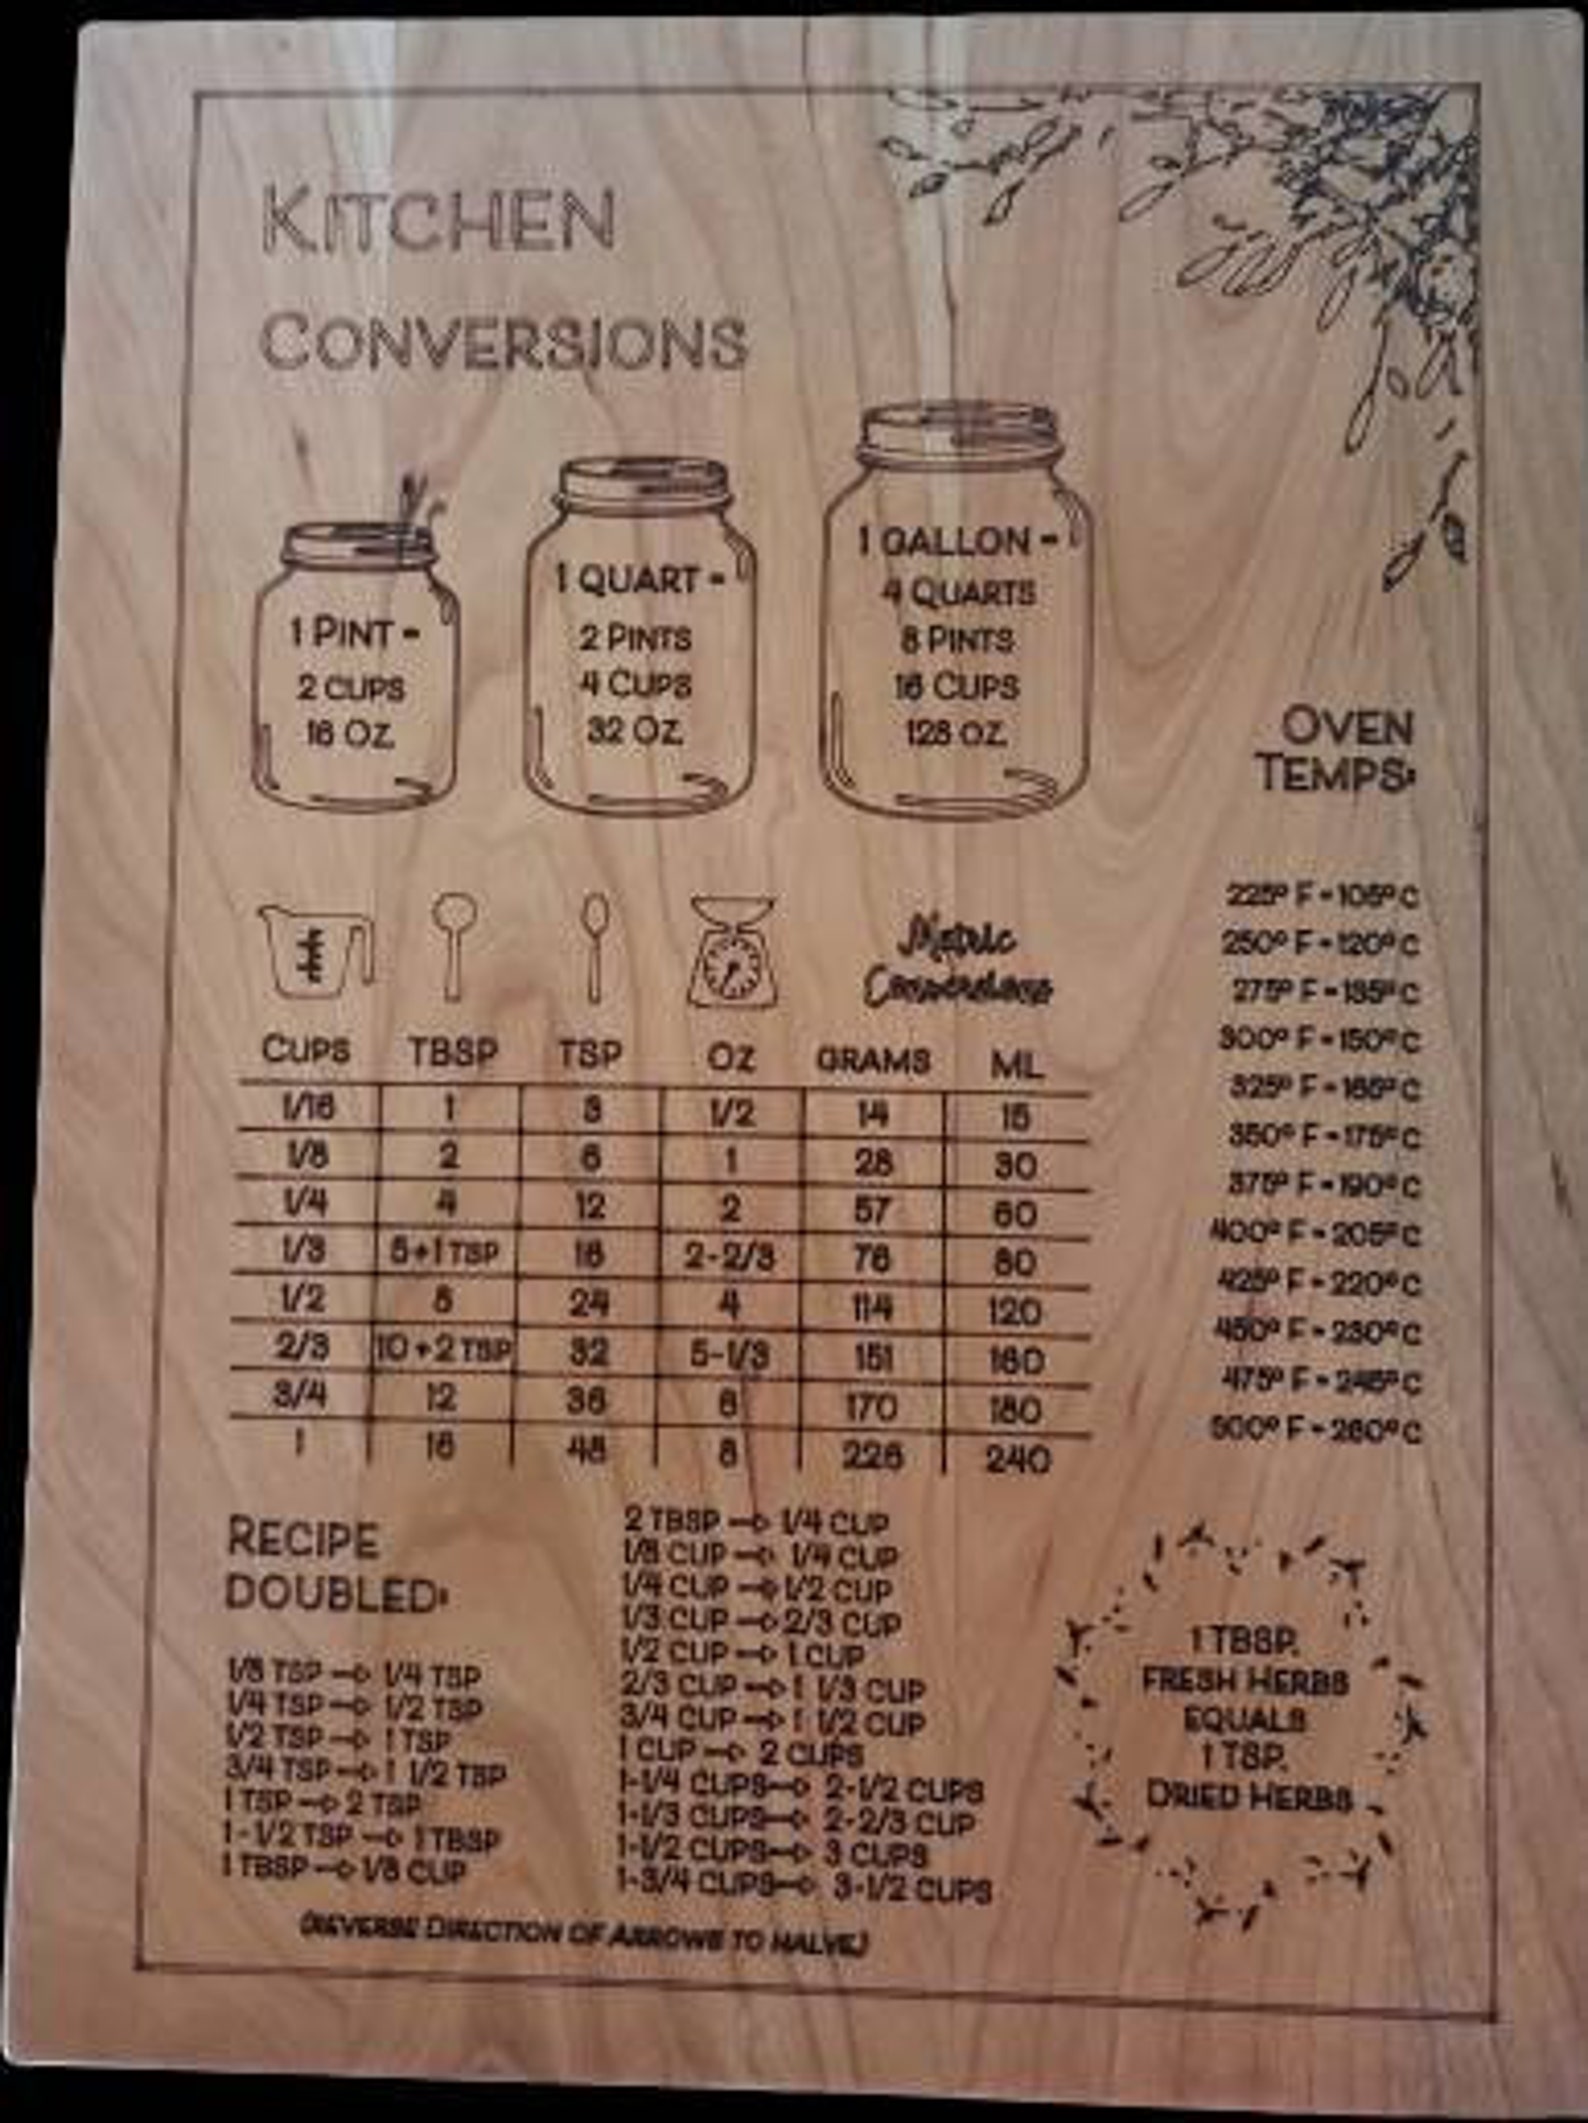 hardwood-cutting-board-with-kitchen-conversion-chart-etsy